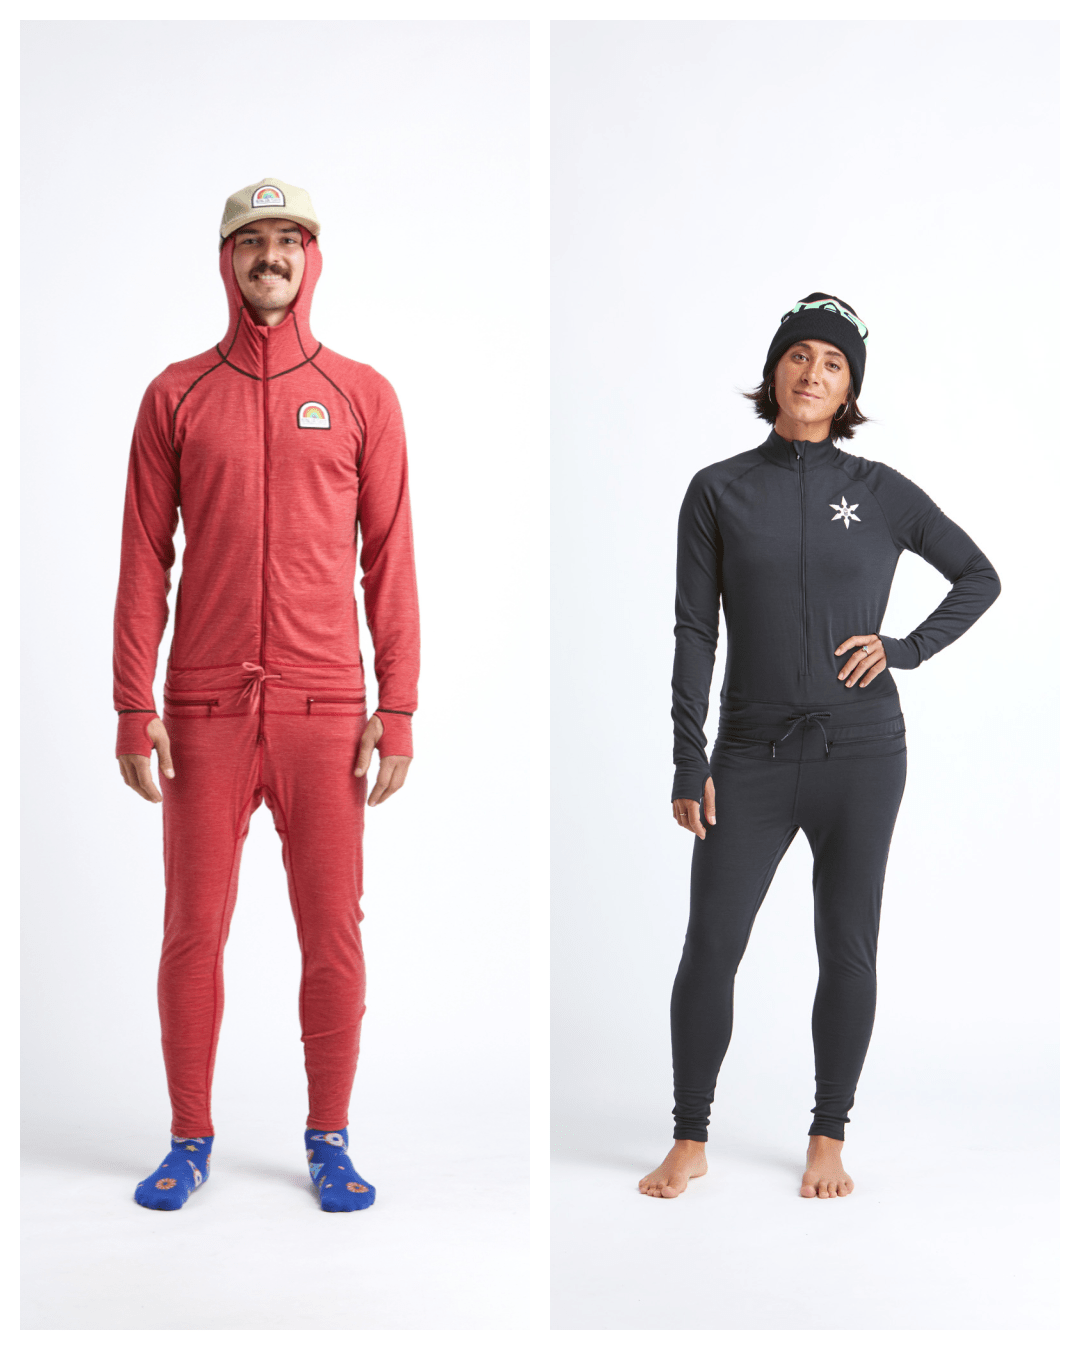 https://www.outdoorsportswire.com/wp-content/uploads/2021/10/NinjaSuit-MErino-and-Classic.png